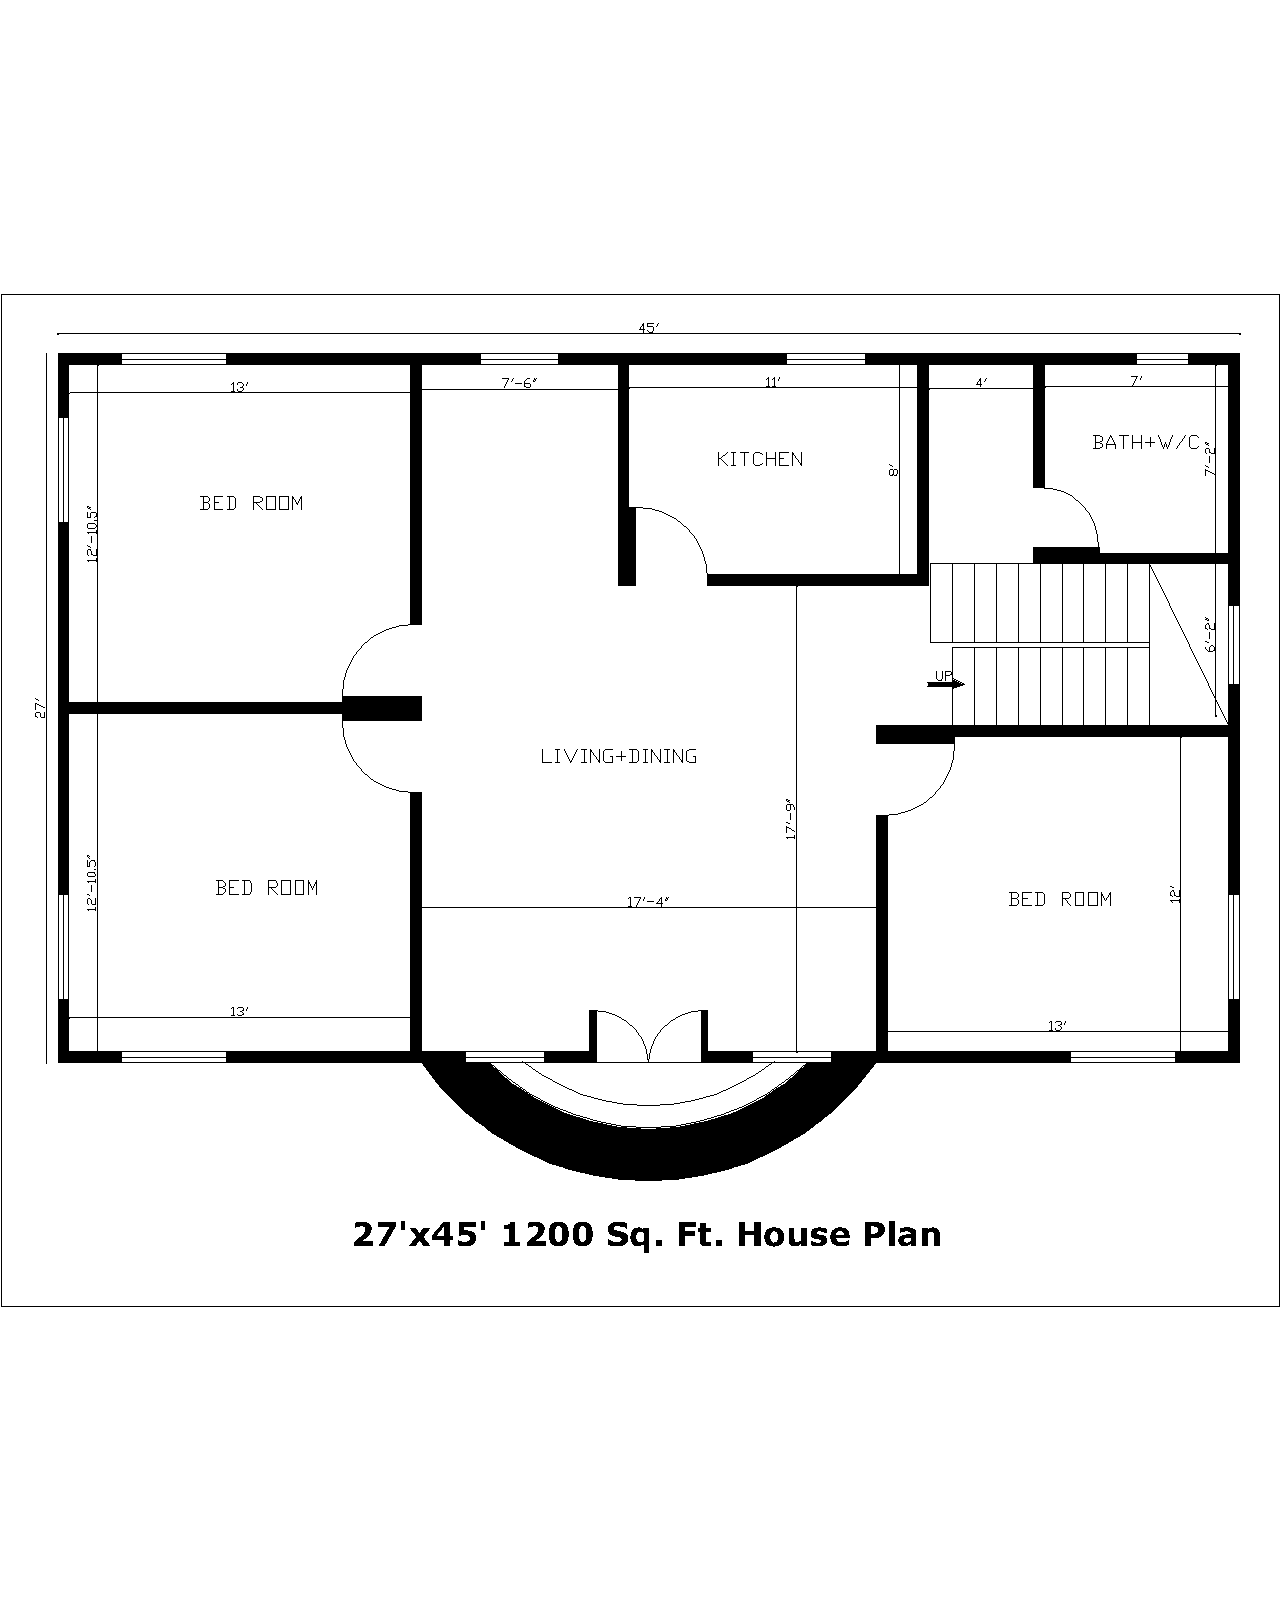 Low Budget 1200 sq. ft. House Plan